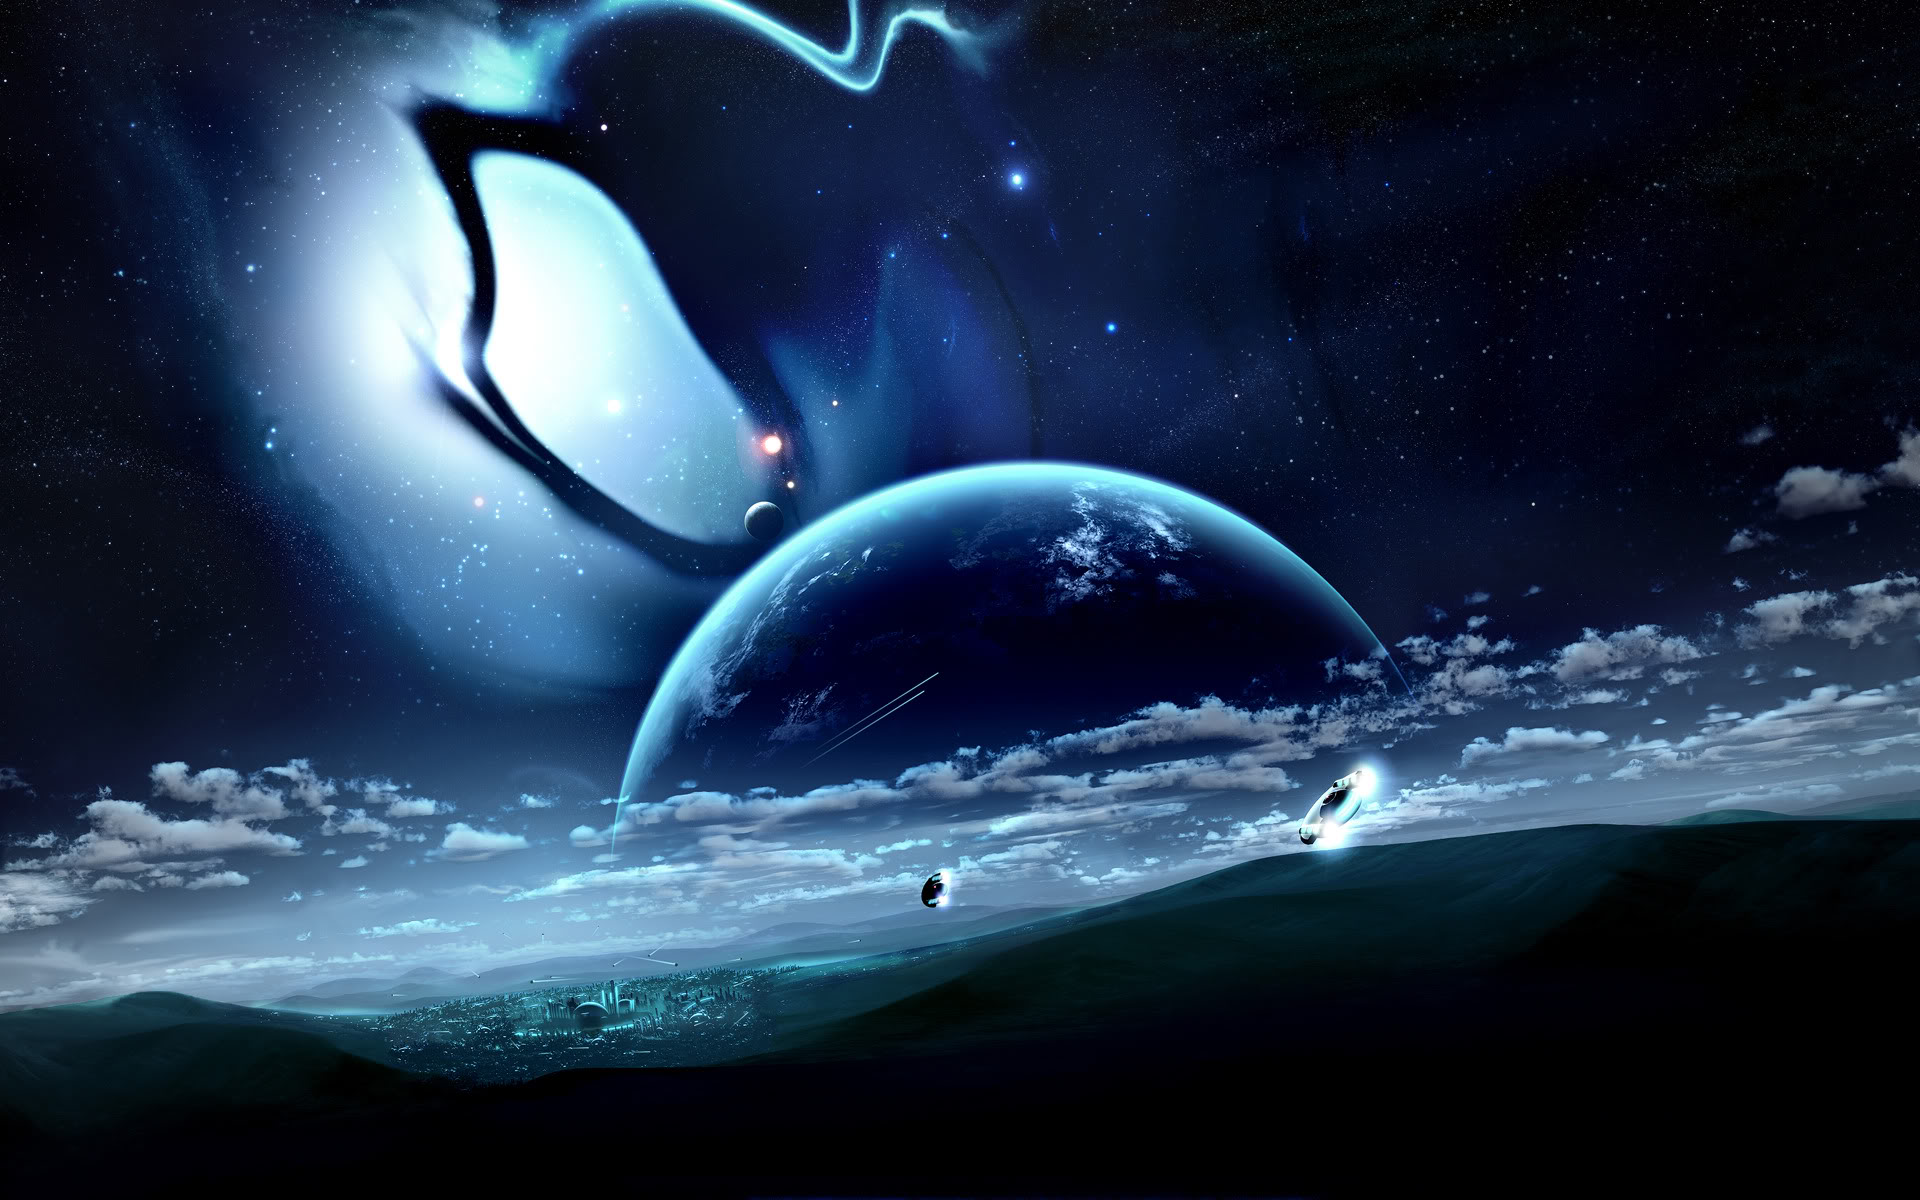 Robot explores space with planet, ship, Stargate, Metal Gear Solid, and road in HD desktop wallpaper.